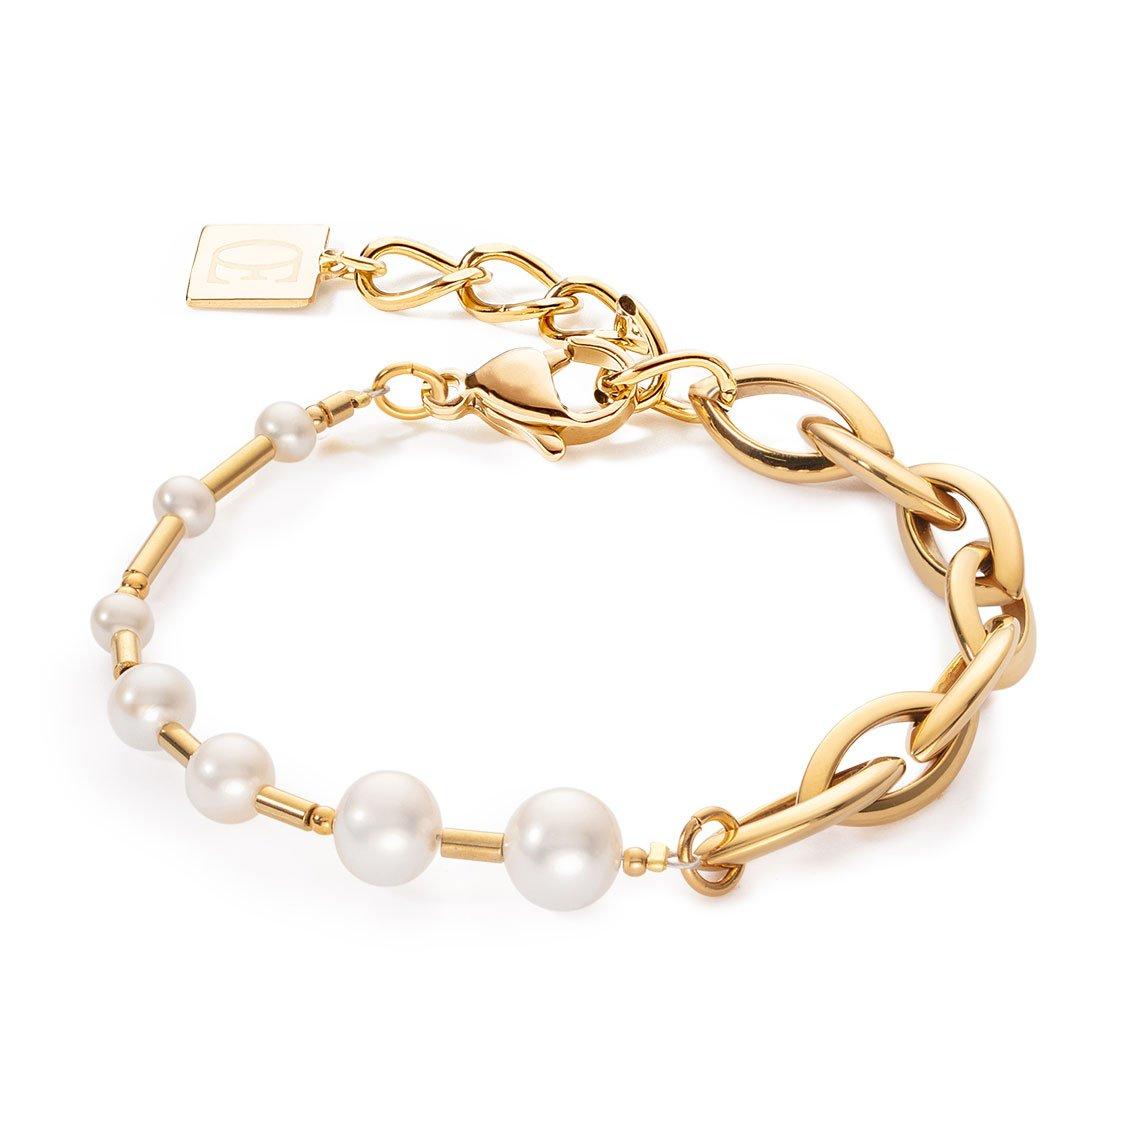 A Modern 9ct Gold and Freshwater Pearl Bead Necklace, in a Beaverbrooks box.